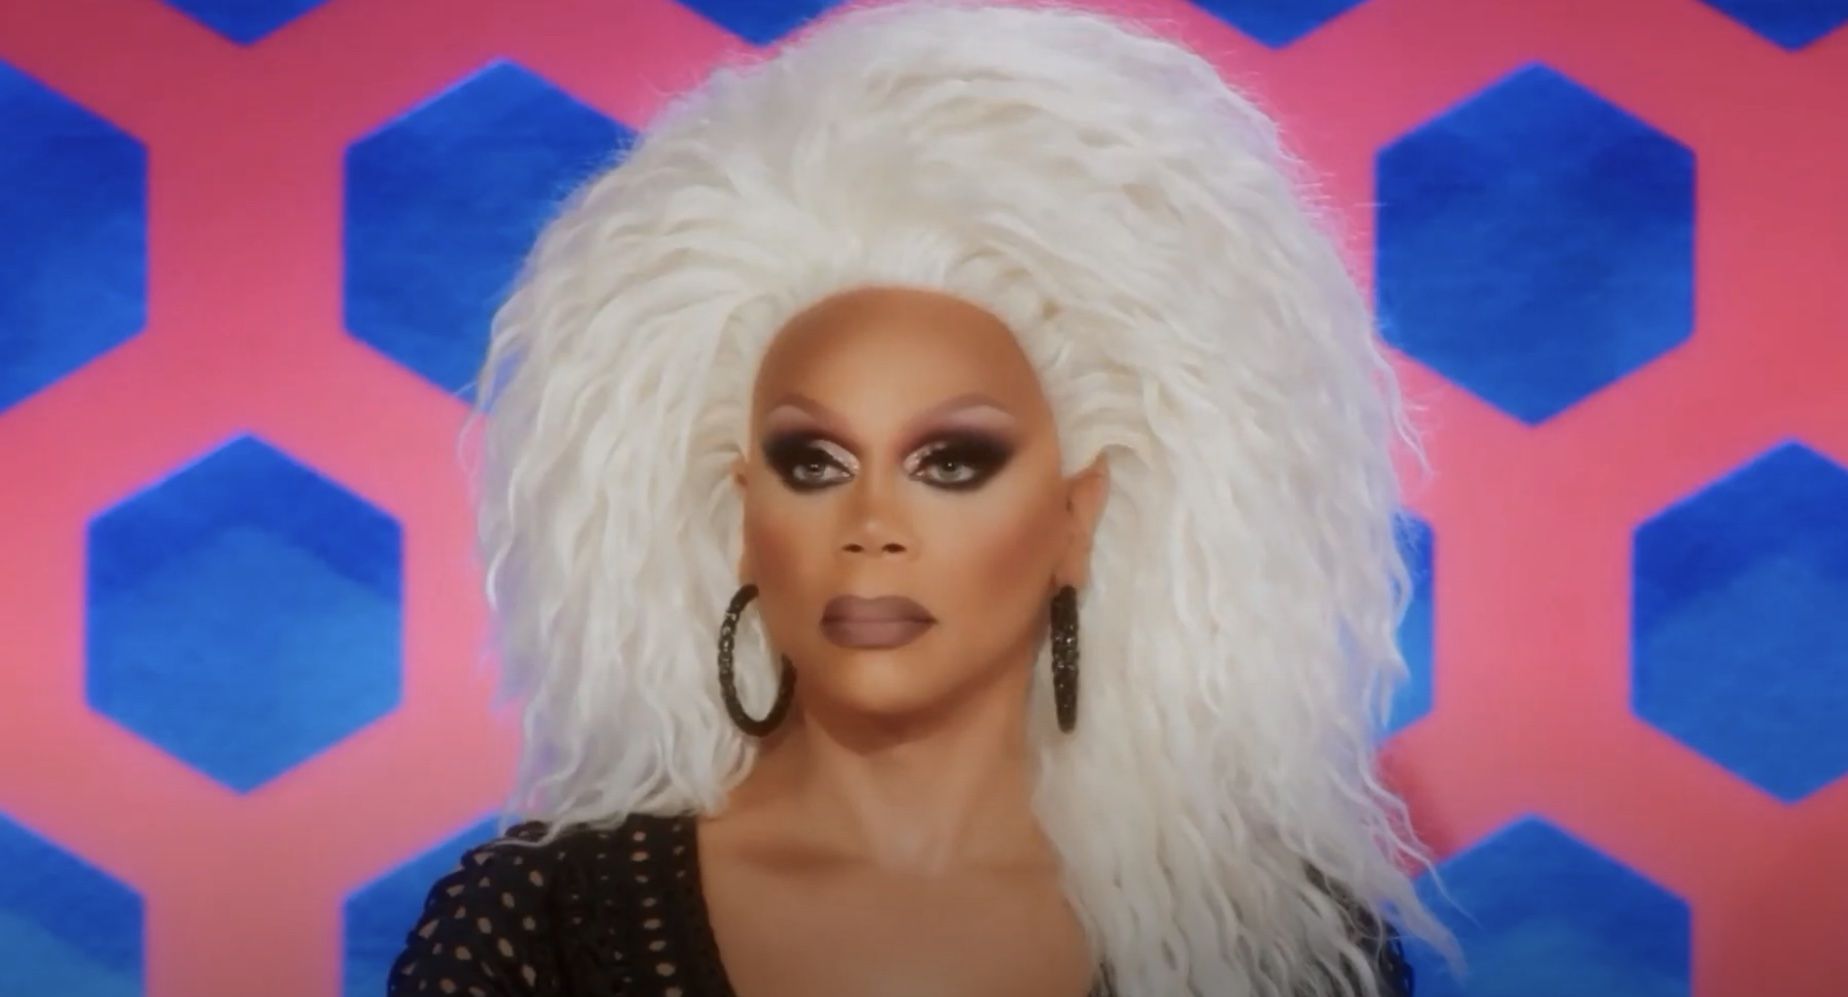 RuPaul confronts Drag Race Down Under star over use of blackface